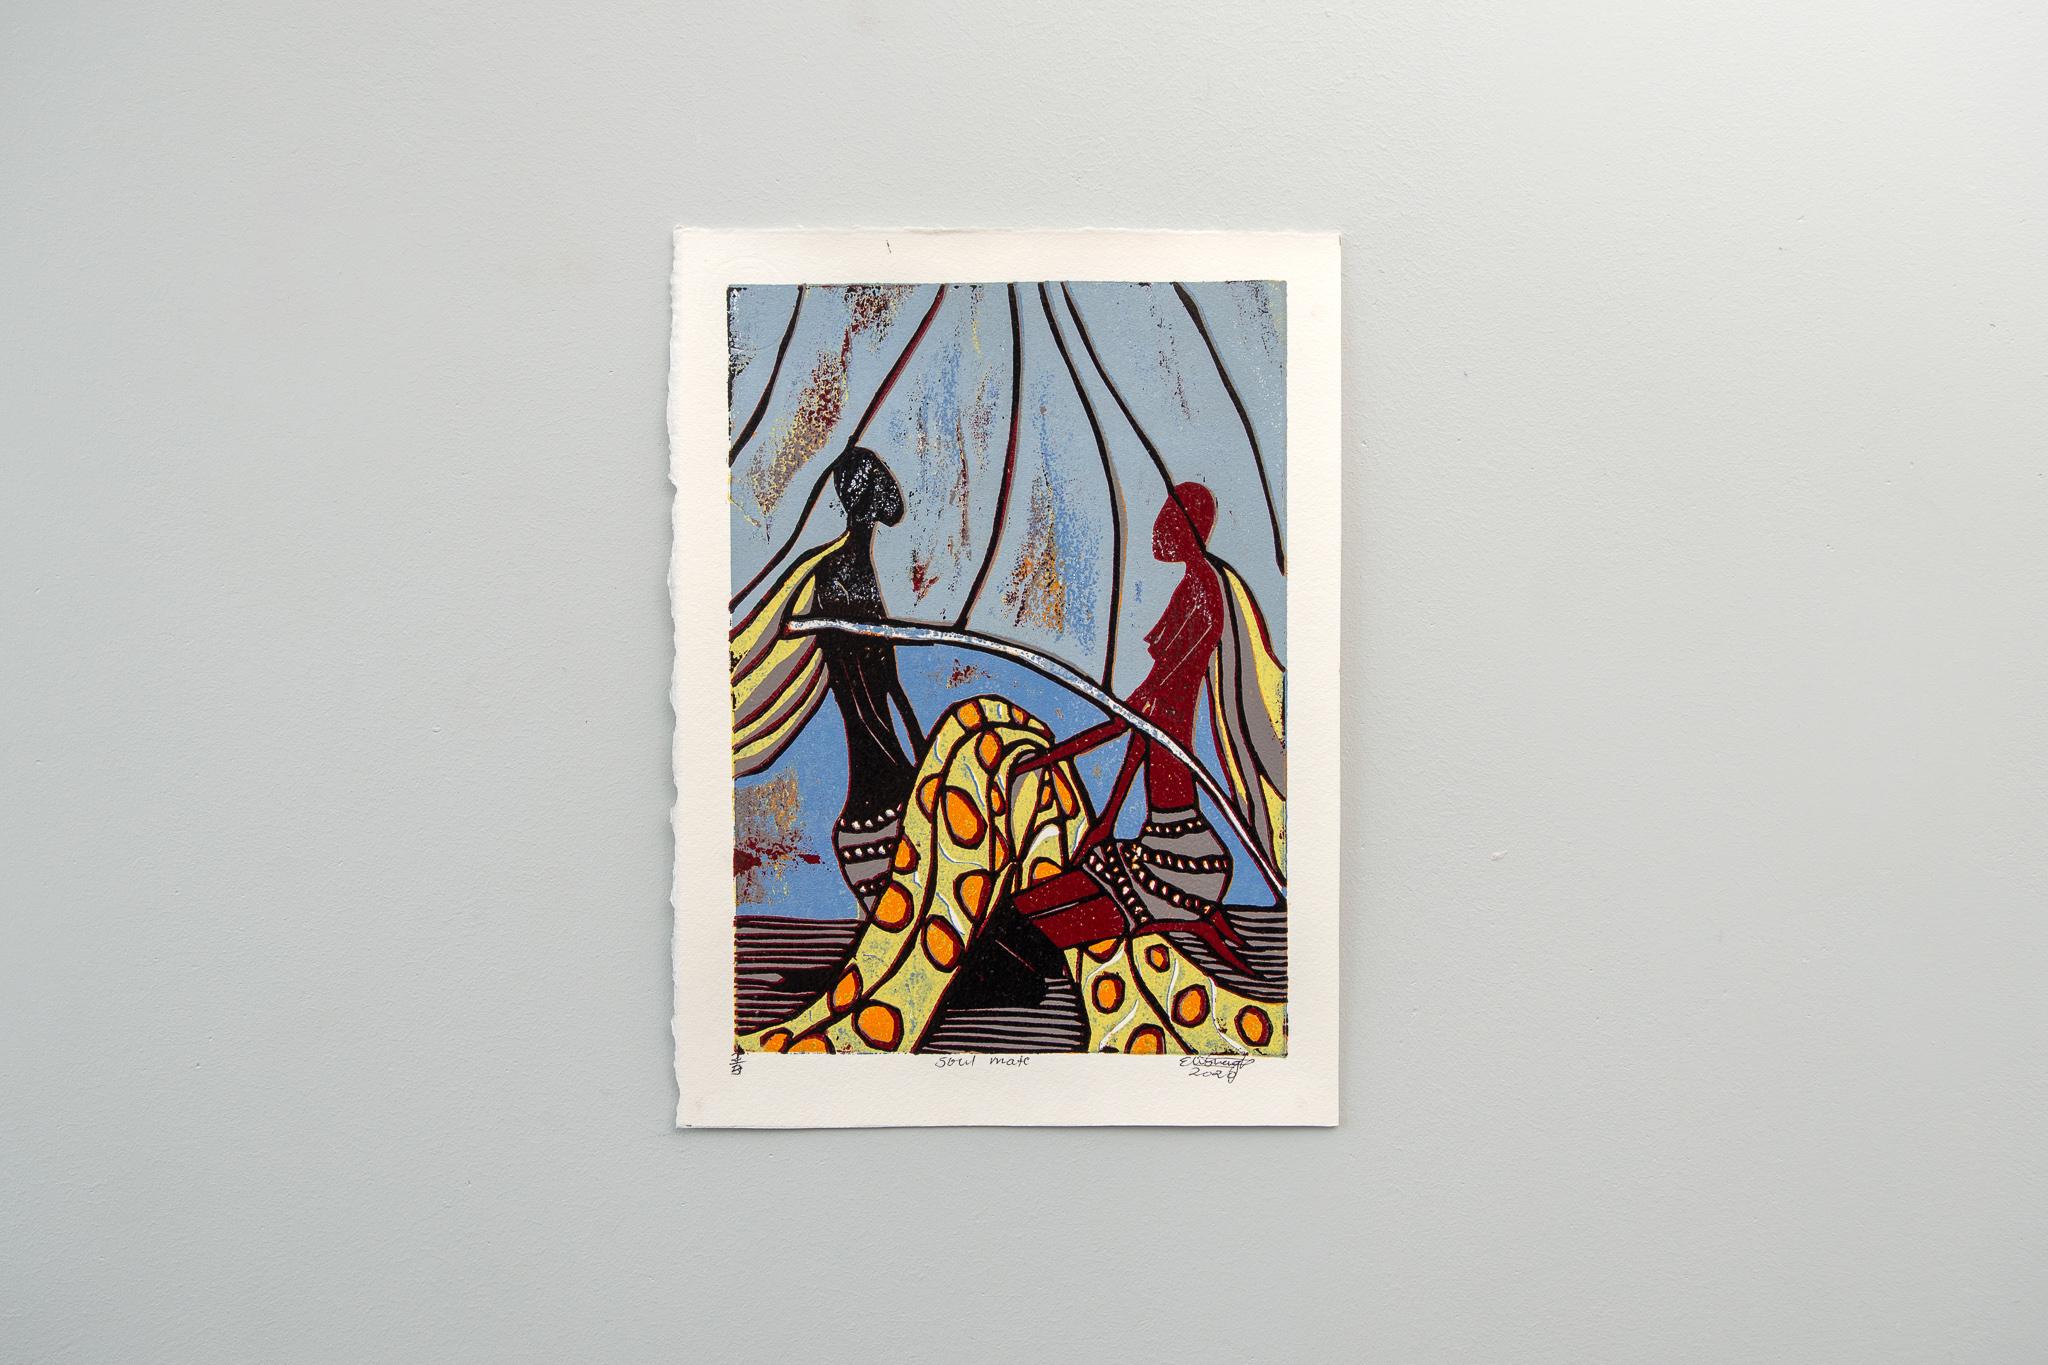 Soul Mate, 2020. Cardboard block print on fabriano paper, 2/3

Elisia Nghidishange was born in Eenhana in northern Namibia. This printmaker, sculptor and mixed media artist graduated from the College of the Arts in Windhoek in 2016. Nghidishange has